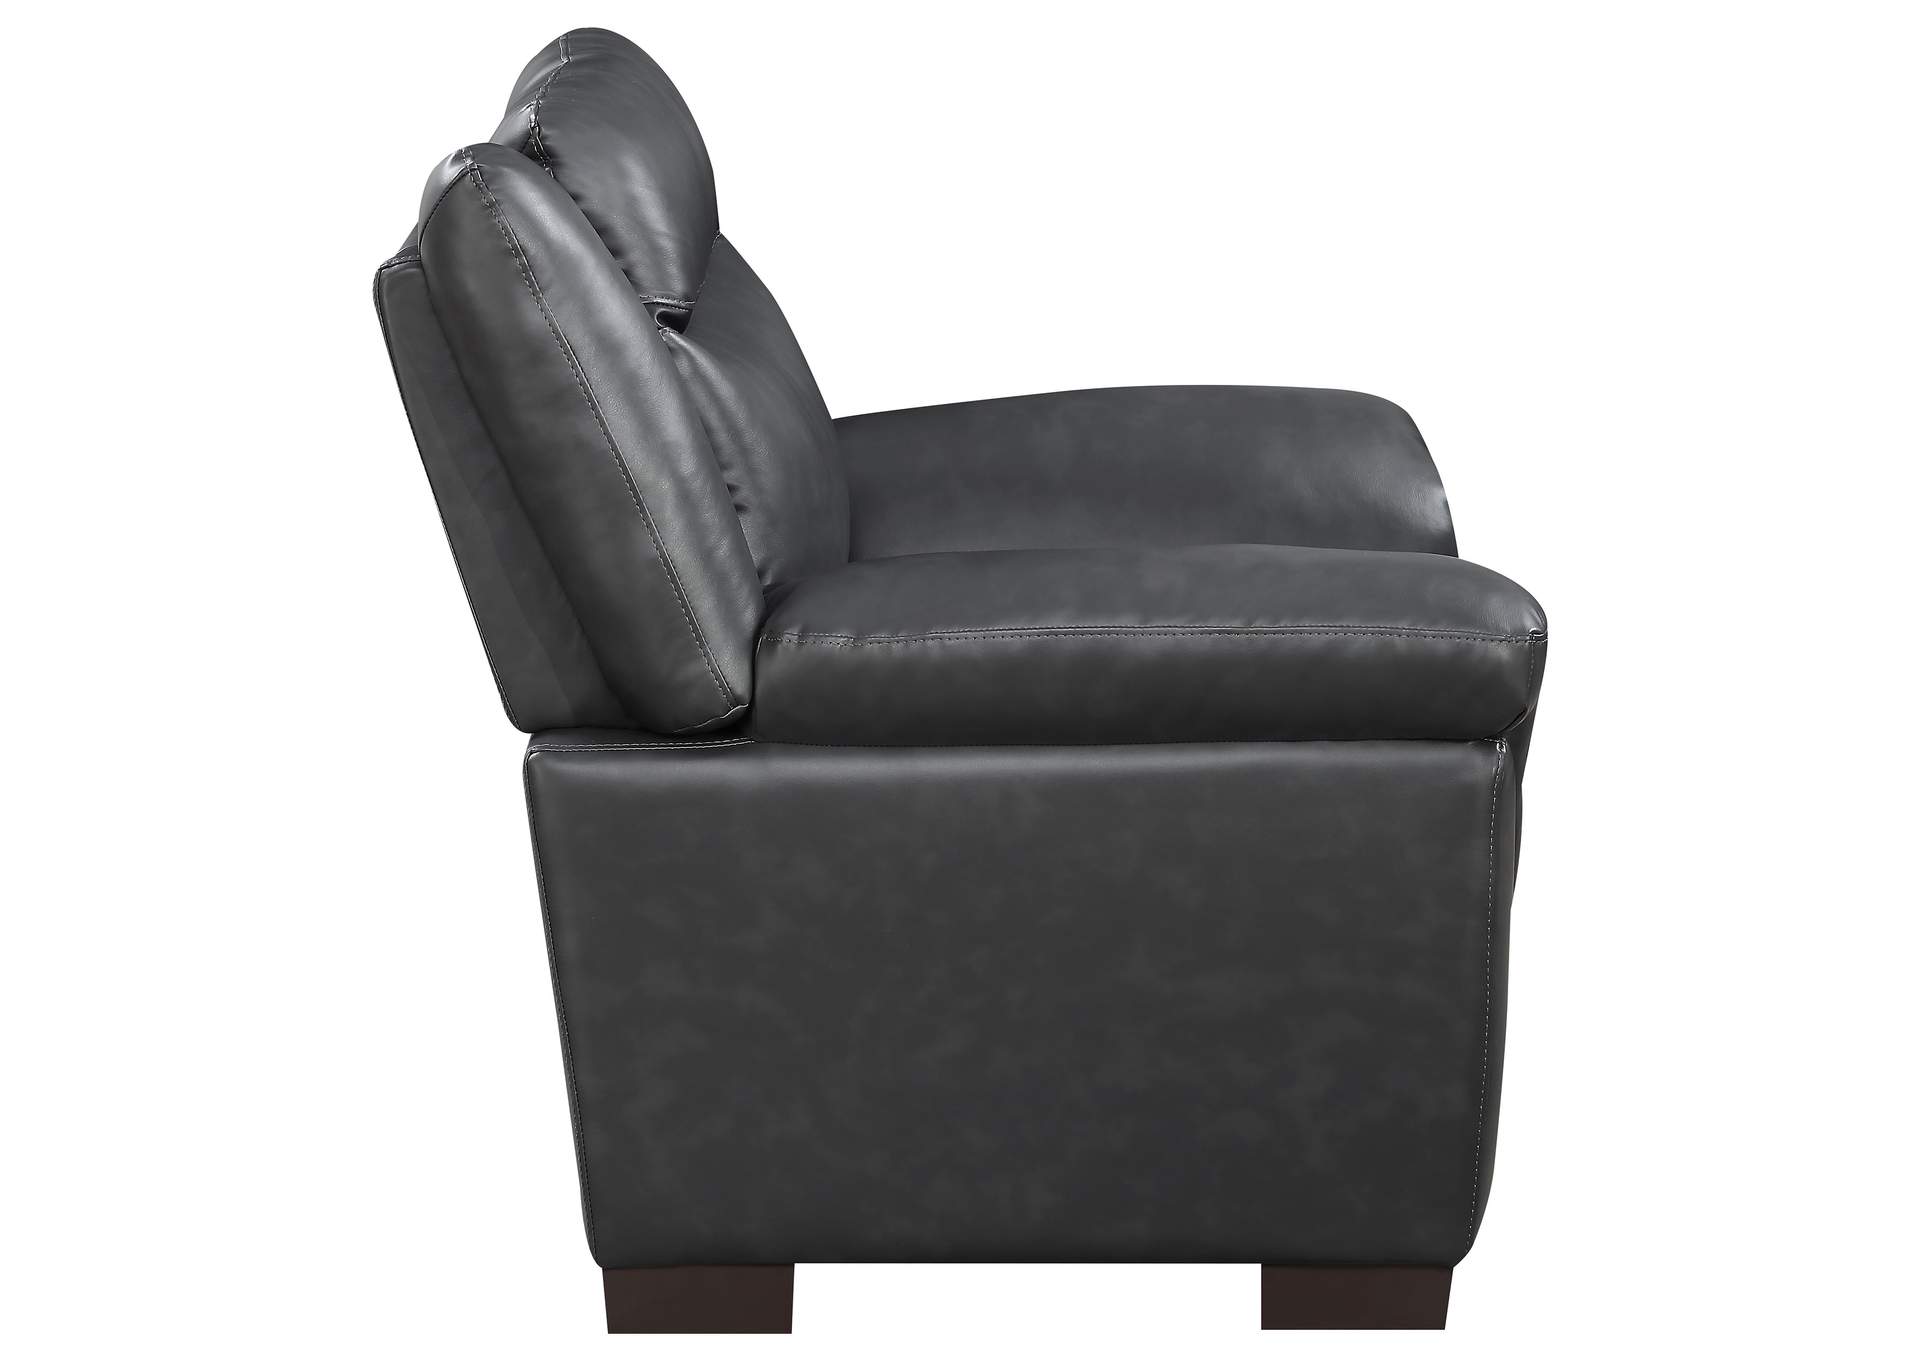 Arabella Pillow Top Upholstered Chair Grey,Coaster Furniture